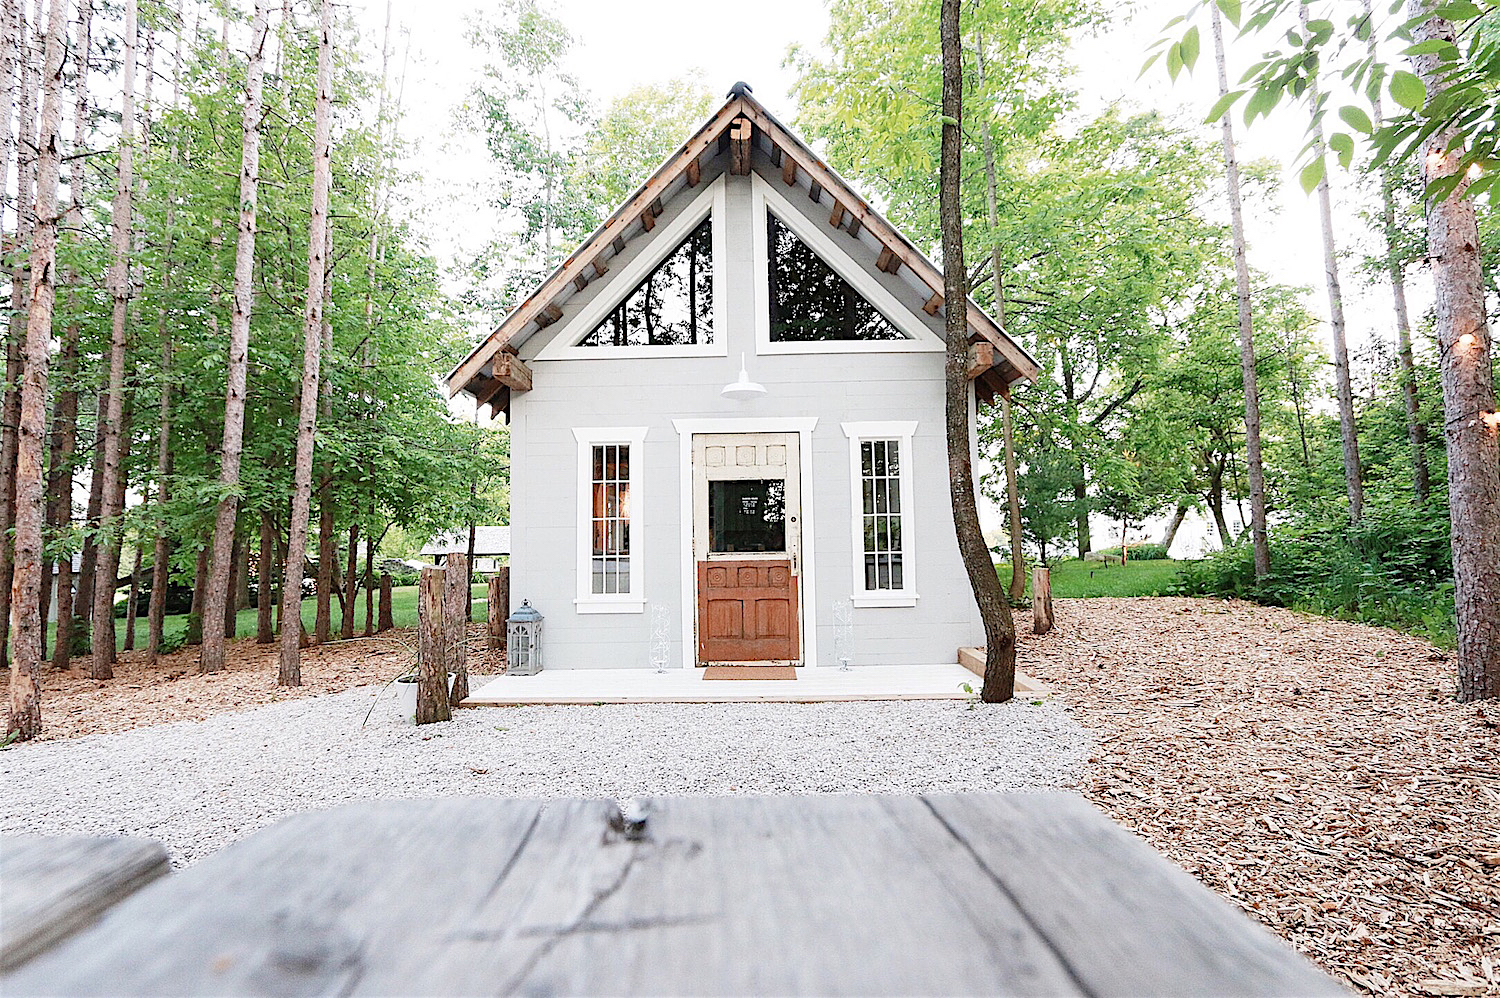 Wedding / location / retreat / venue rental: Inquire to rent the cabin, treehouse, pool, 100 acres, 5000 sq ft home, pool, barn and so much more .... DESIGN THE LIFE YOU WANT TO LIVE by Lynne Knowlton